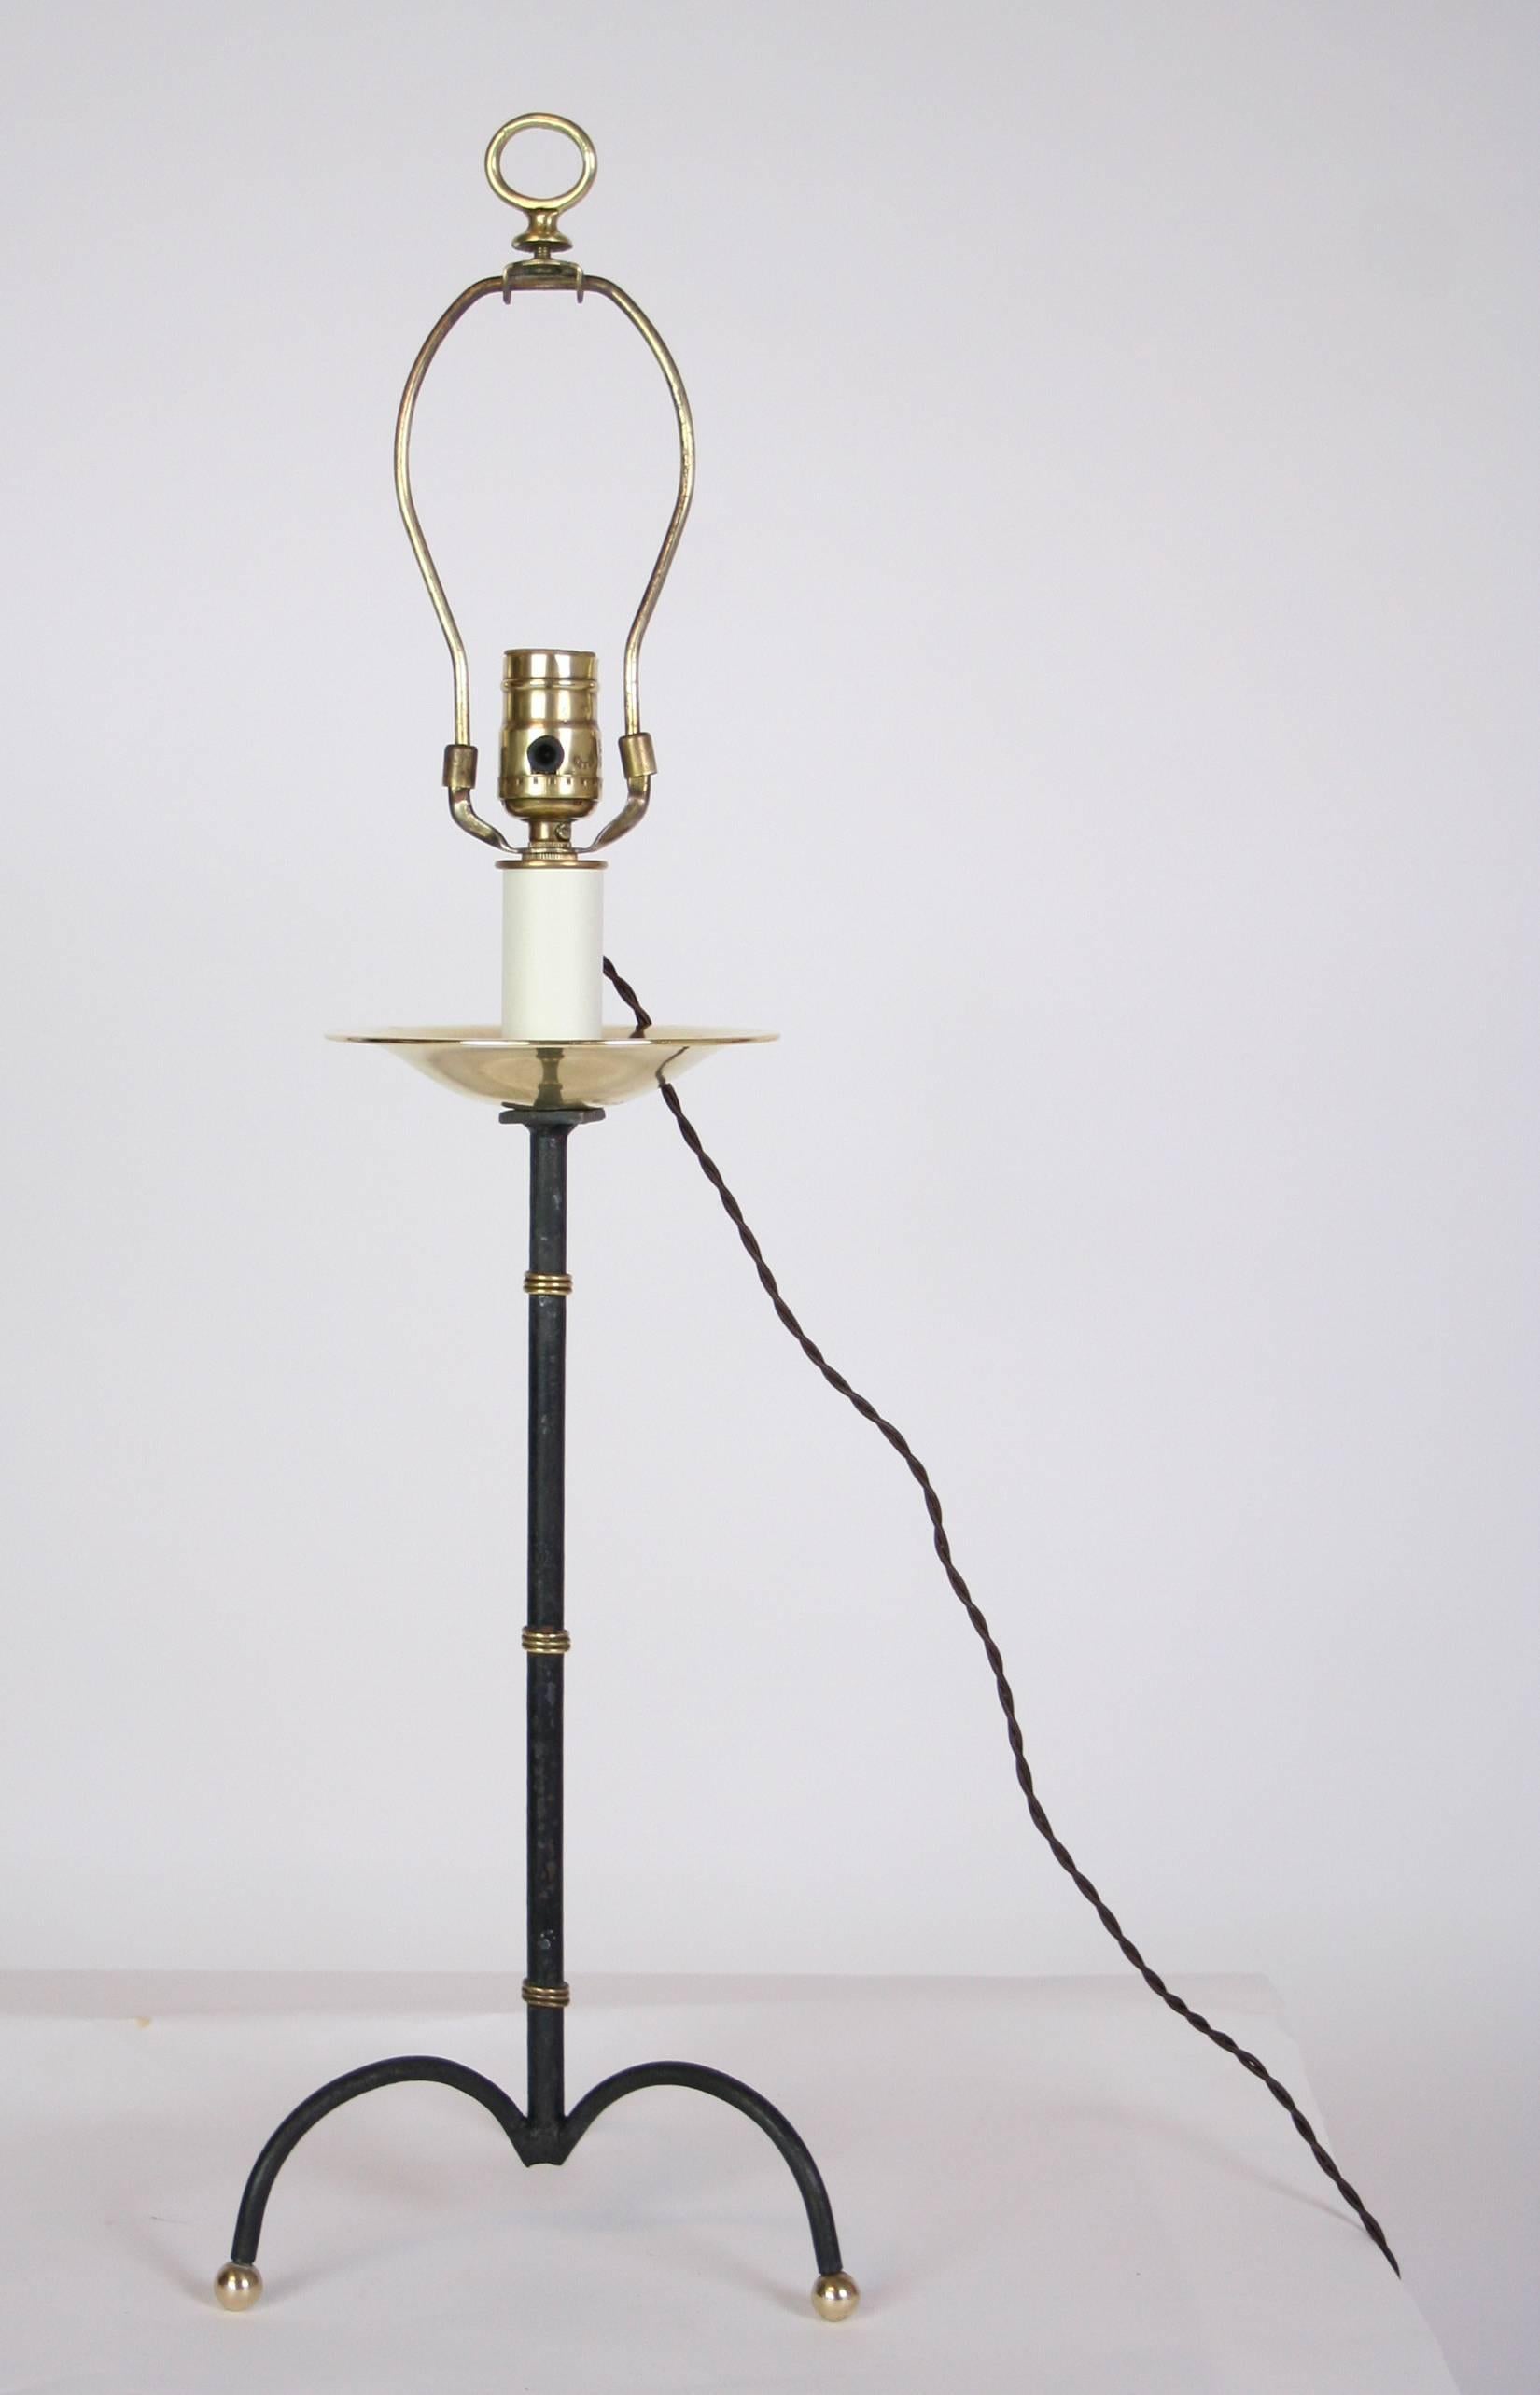 A Jacques Adnet lamp newly created from an astray. Wrought metal tripod base and shaft with brass accents and a brass bowl repurposed as a lamp. French wired with twisted cloth cord. Shade for display only. 